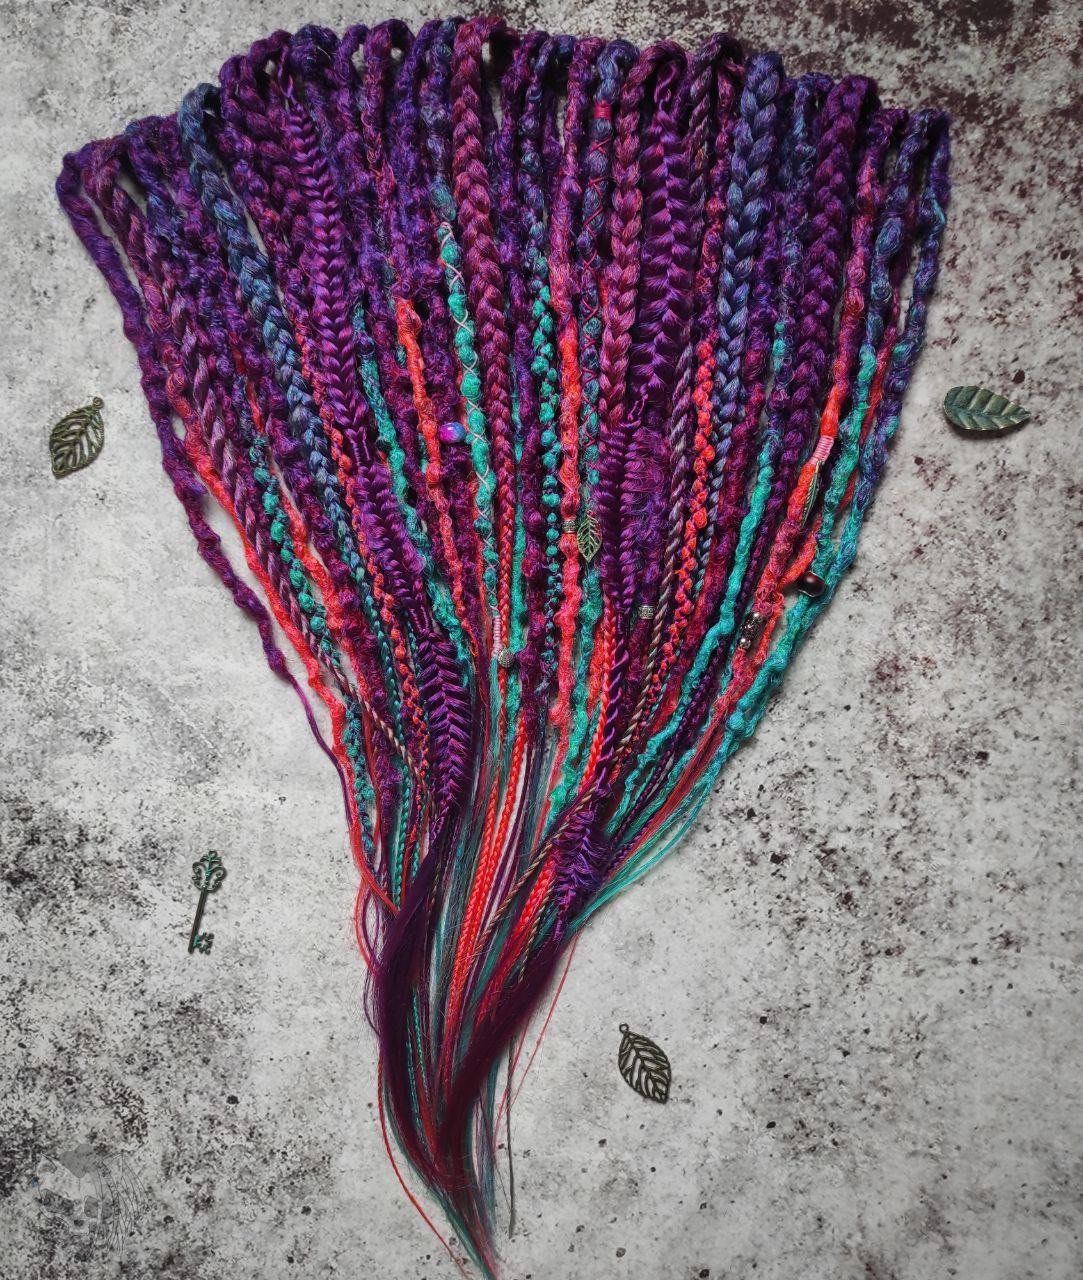 Synthetic dreads with purple transitioning into green and orange, complemented by braids